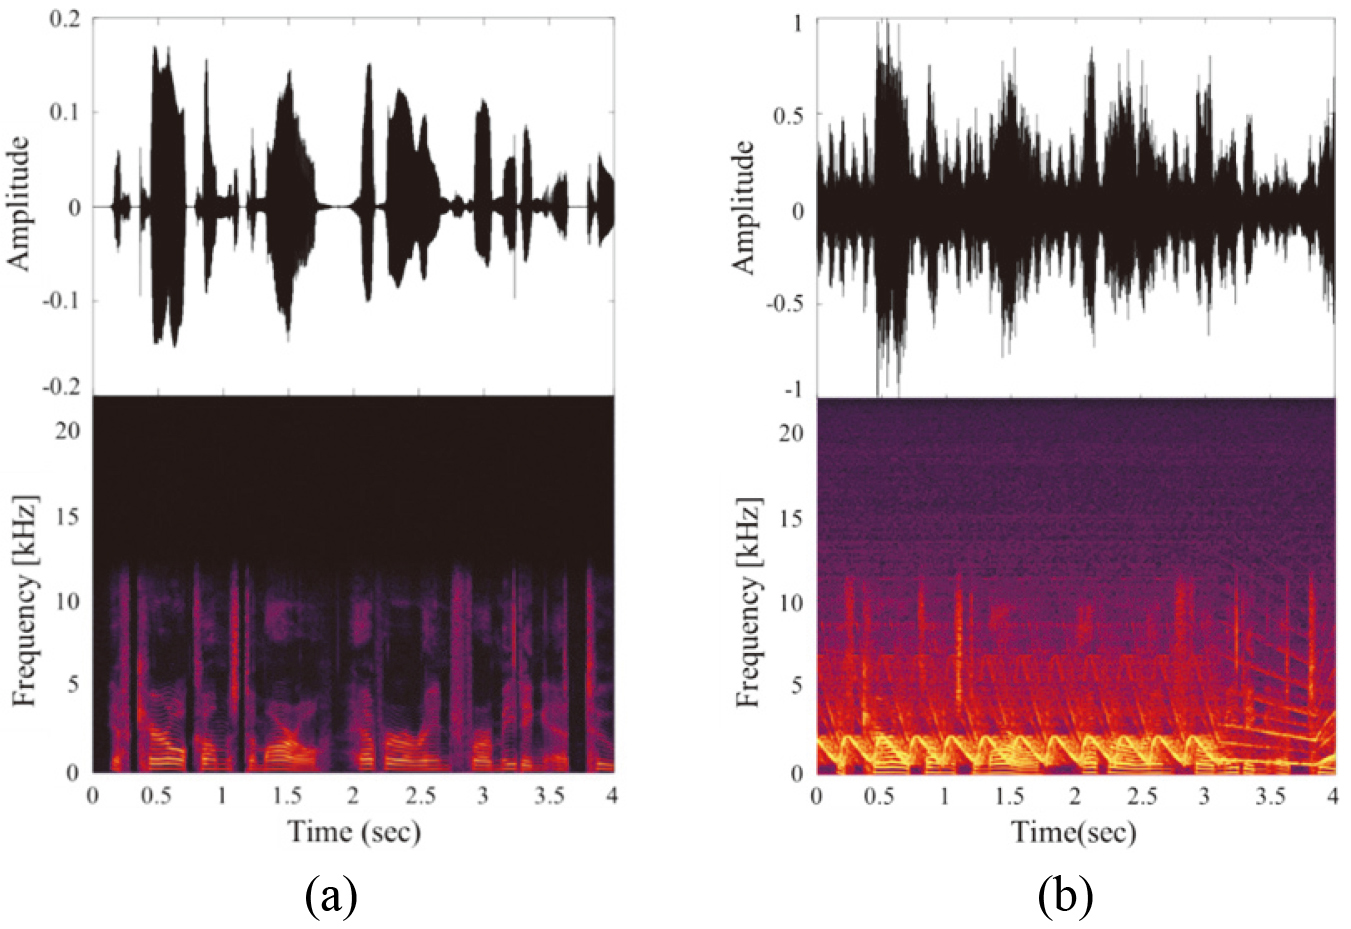 The output dataset to be compared with each input dataset. (a) A speech signal and (b) A sound signal with a mix of speech and warning sound.